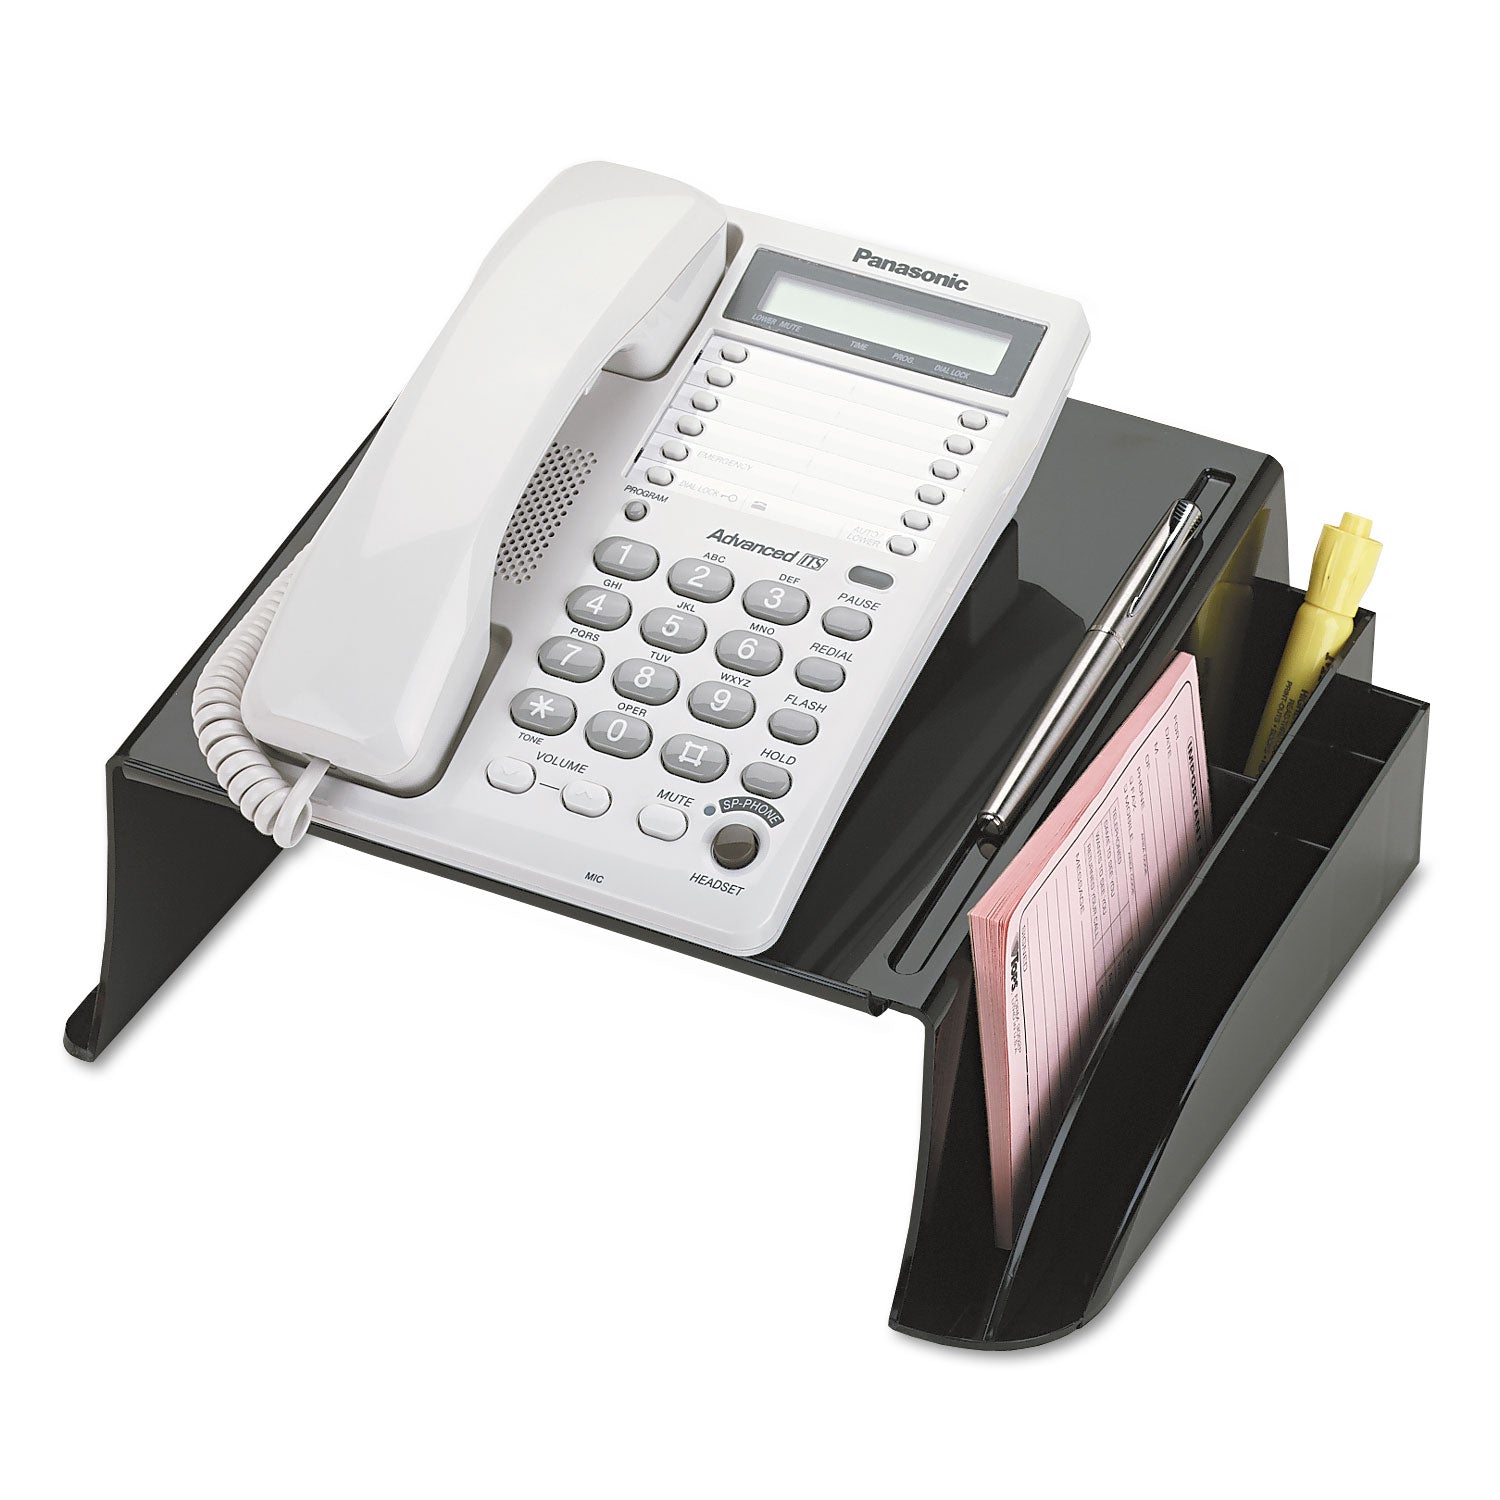 Officemate 2200 Series Telephone Stand, 12.25 x 10.5 x 5.25, Black - 